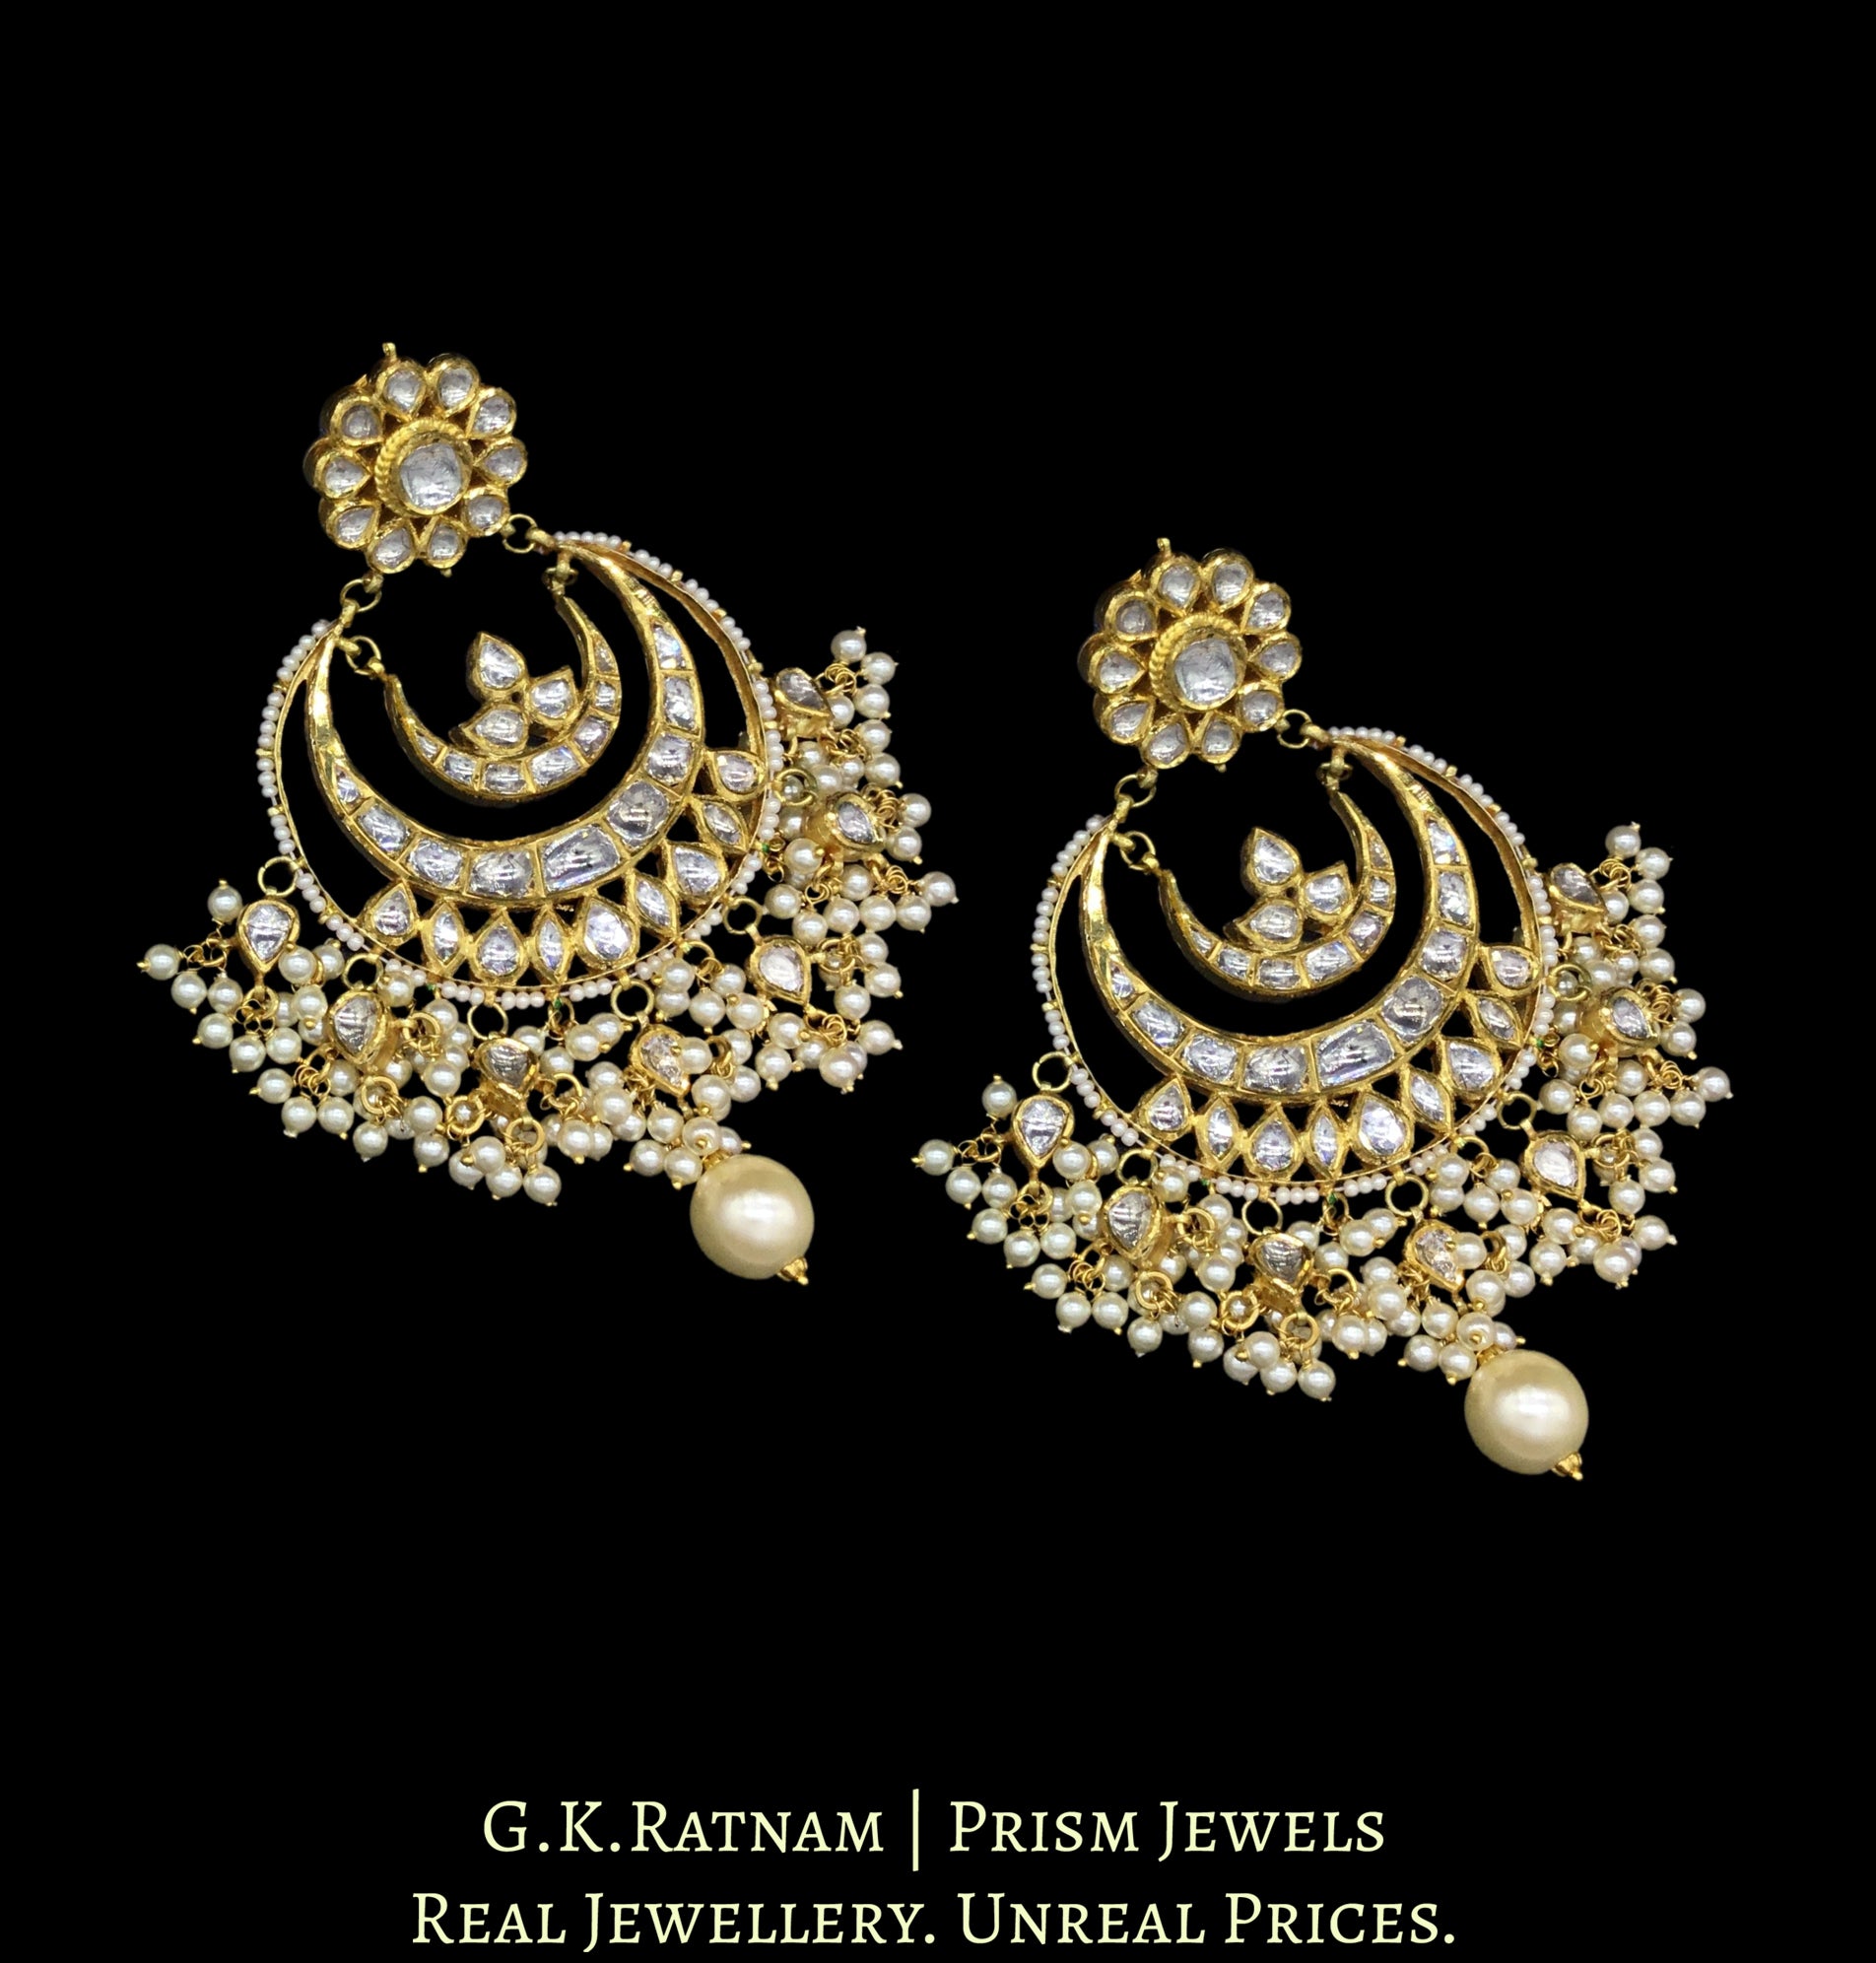 18k Gold and Diamond Polki Round multi-tier Chand Bali Earring Pair with pearls